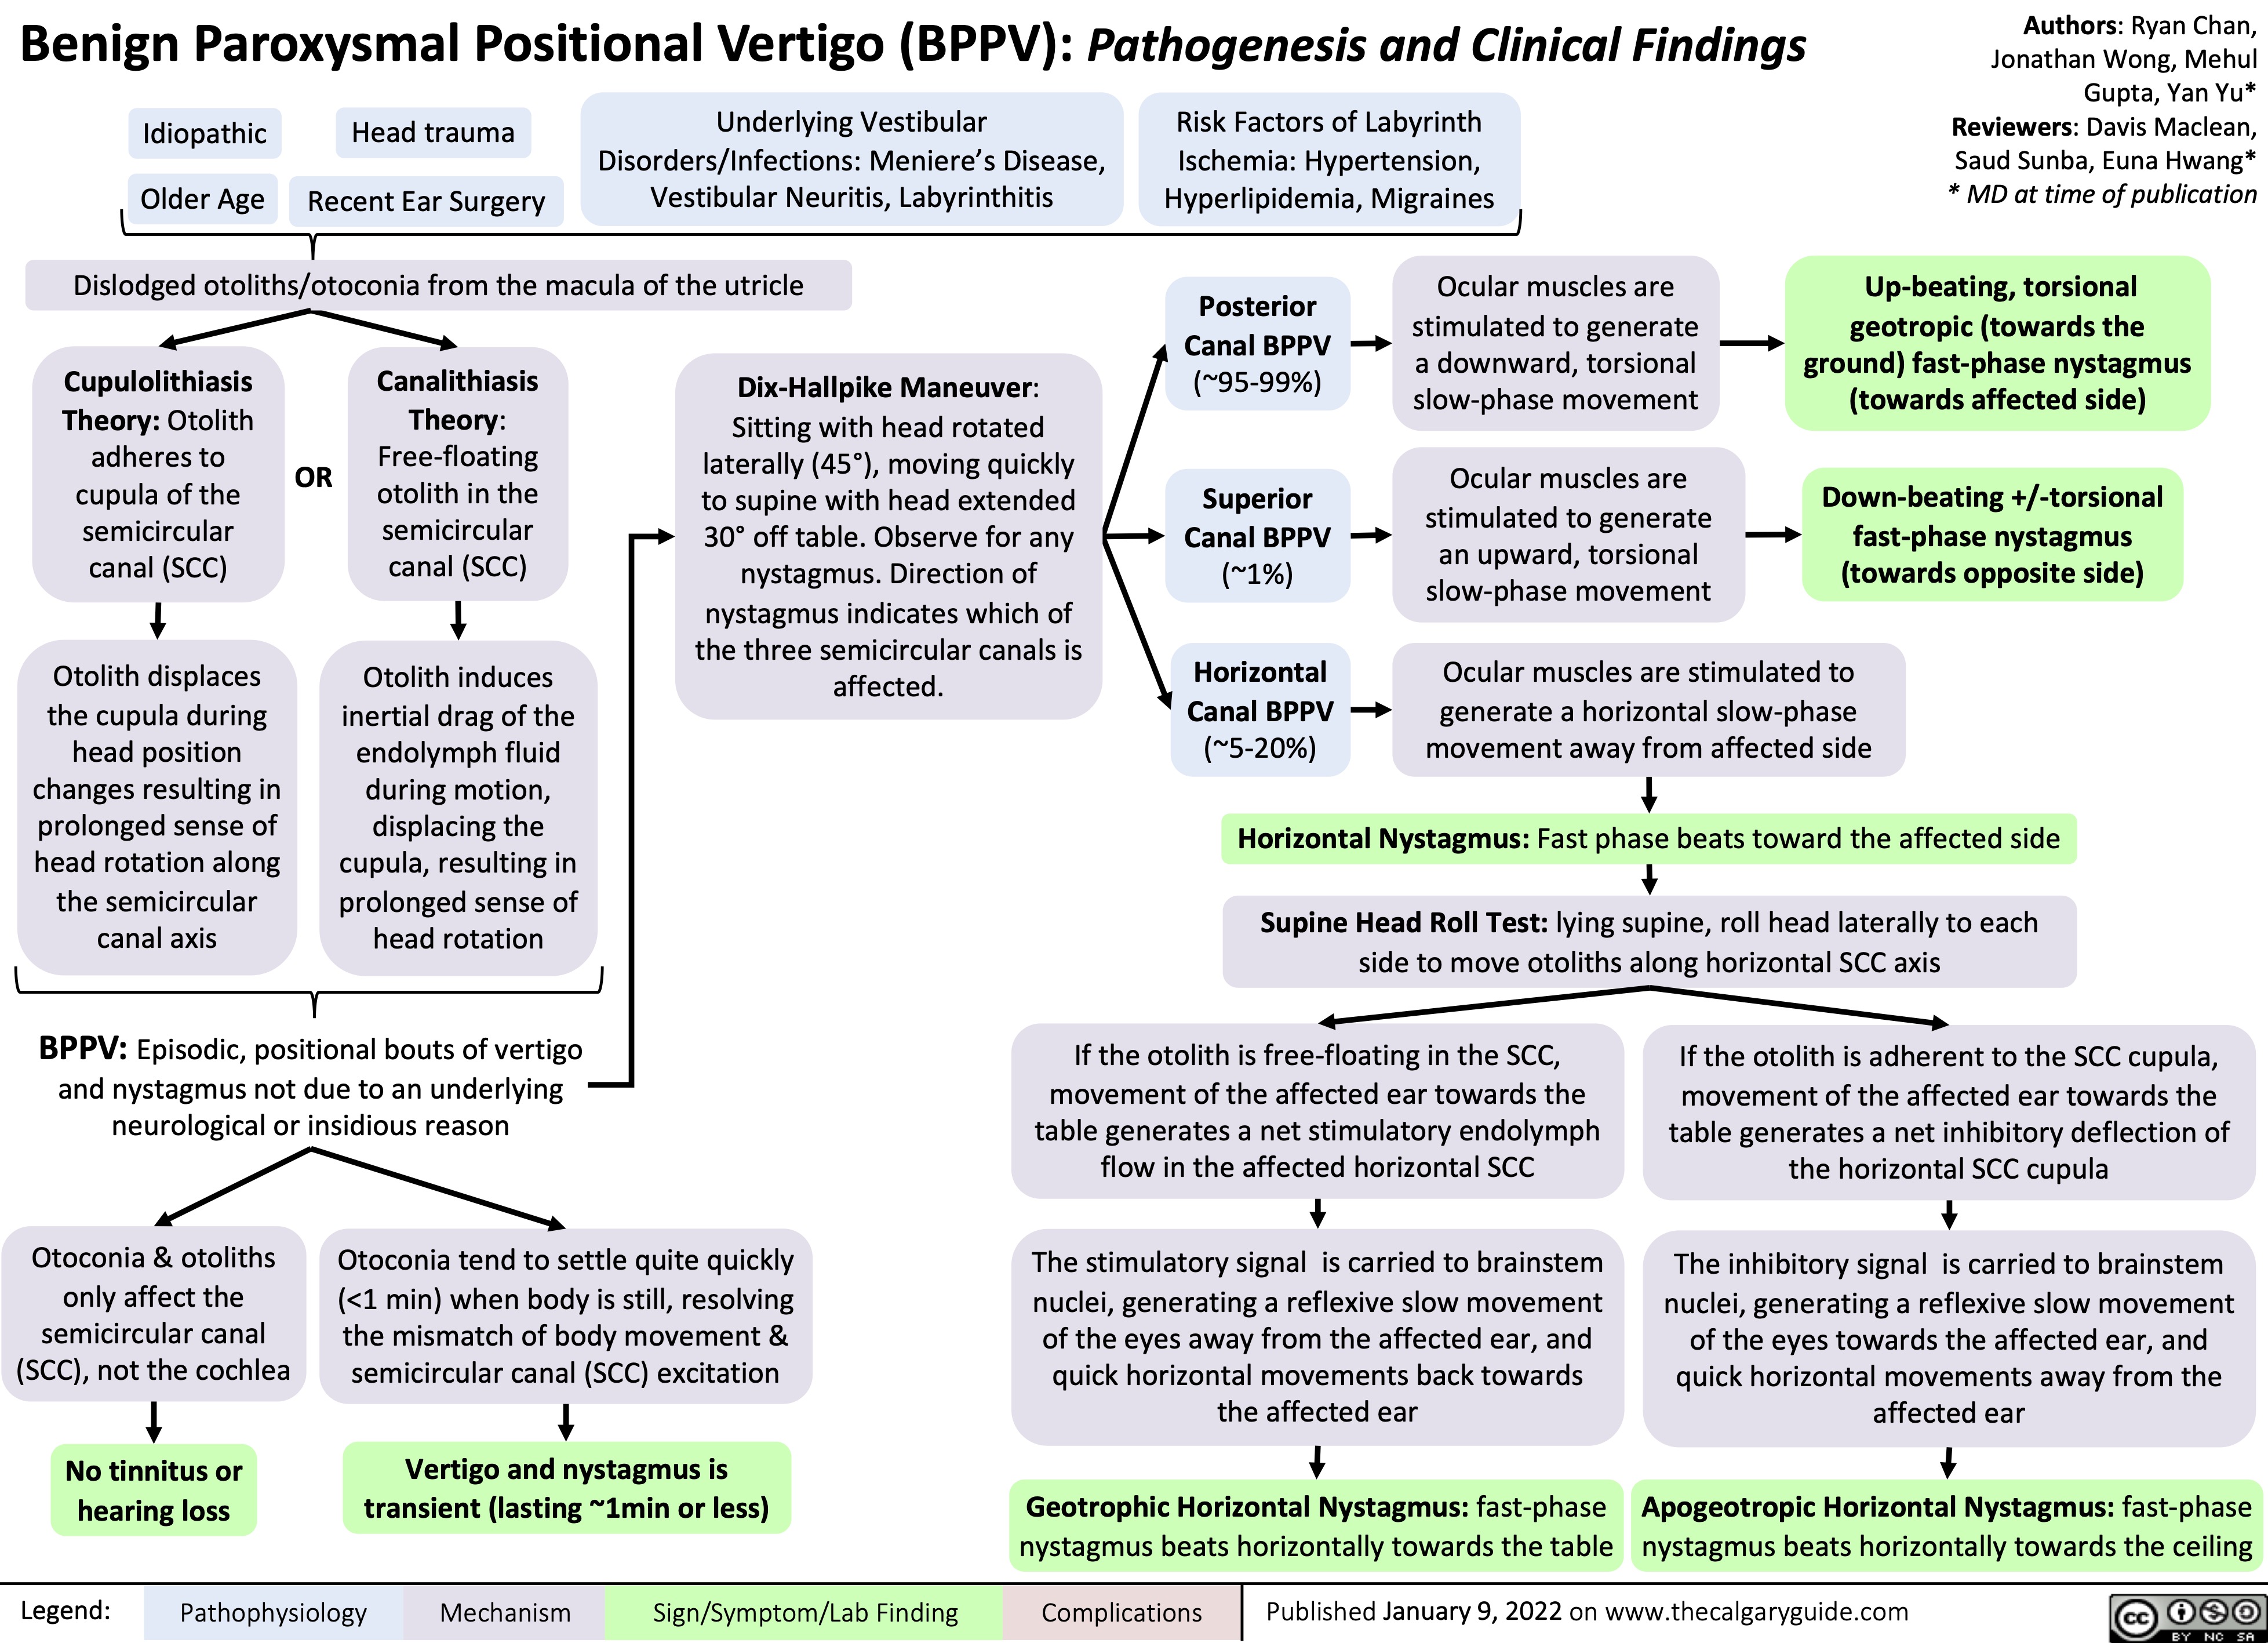 Benign Paroxysmal Positional Vertigo (BPPV): Pathogenesis and Clinical Findings
Authors: Ryan Chan, Jonathan Wong, Mehul Gupta, Yan Yu* Reviewers: Davis Maclean, Saud Sunba, Euna Hwang* * MD at time of publication
Up-beating, torsional geotropic (towards the
ground) fast-phase nystagmus (towards affected side)
Down-beating +/-torsional fast-phase nystagmus (towards opposite side)
    Idiopathic Older Age
Head trauma
Recent Ear Surgery
Underlying Vestibular Disorders/Infections: Meniere’s Disease, Vestibular Neuritis, Labyrinthitis
Risk Factors of Labyrinth
Ischemia: Hypertension, Hyperlipidemia, Migraines
      Dislodged otoliths/otoconia from the macula of the utricle
Posterior Canal BPPV (~95-99%)
Superior Canal BPPV (~1%)
Horizontal Canal BPPV (~5-20%)
Ocular muscles are stimulated to generate
a downward, torsional slow-phase movement
Ocular muscles are stimulated to generate
an upward, torsional slow-phase movement
      Cupulolithiasis Theory: Otolith adheres to cupula of the semicircular canal (SCC)
Otolith displaces the cupula during head position changes resulting in prolonged sense of head rotation along the semicircular canal axis
OR
Canalithiasis Theory: Free-floating otolith in the semicircular canal (SCC)
Otolith induces inertial drag of the endolymph fluid during motion, displacing the cupula, resulting in prolonged sense of head rotation
Dix-Hallpike Maneuver: Sitting with head rotated laterally (45°), moving quickly to supine with head extended 30° off table. Observe for any nystagmus. Direction of nystagmus indicates which of the three semicircular canals is affected.
        Ocular muscles are stimulated to generate a horizontal slow-phase movement away from affected side
 Horizontal Nystagmus: Fast phase beats toward the affected side Supine Head Roll Test: lying supine, roll head laterally to each
side to move otoliths along horizontal SCC axis
     BPPV: Episodic, positional bouts of vertigo and nystagmus not due to an underlying neurological or insidious reason
If the otolith is free-floating in the SCC, movement of the affected ear towards the table generates a net stimulatory endolymph flow in the affected horizontal SCC
The stimulatory signal is carried to brainstem nuclei, generating a reflexive slow movement
of the eyes away from the affected ear, and quick horizontal movements back towards the affected ear
Geotrophic Horizontal Nystagmus: fast-phase nystagmus beats horizontally towards the table
If the otolith is adherent to the SCC cupula,
movement of the affected ear towards the table generates a net inhibitory deflection of the horizontal SCC cupula
The inhibitory signal is carried to brainstem nuclei, generating a reflexive slow movement of the eyes towards the affected ear, and quick horizontal movements away from the affected ear
Apogeotropic Horizontal Nystagmus: fast-phase nystagmus beats horizontally towards the ceiling
      Otoconia & otoliths only affect the
semicircular canal (SCC), not the cochlea
No tinnitus or hearing loss
Otoconia tend to settle quite quickly (<1 min) when body is still, resolving the mismatch of body movement & semicircular canal (SCC) excitation
Vertigo and nystagmus is transient (lasting ~1min or less)
     Legend:
 Pathophysiology
 Mechanism
 Sign/Symptom/Lab Finding
 Complications
Published January 9, 2022 on www.thecalgaryguide.com
  